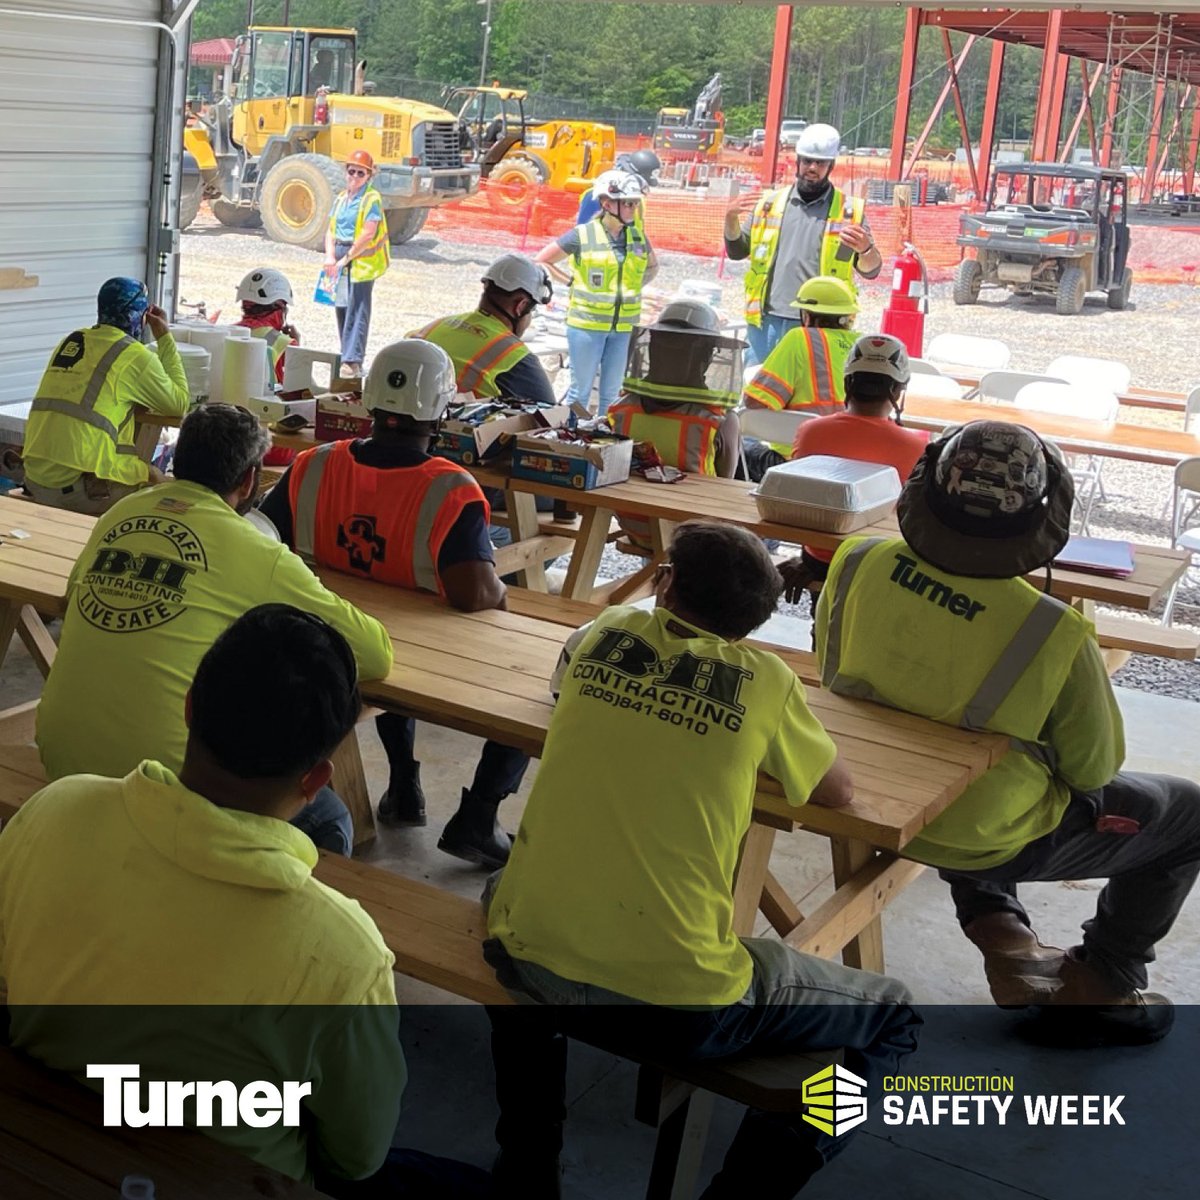 In celebration of #ConstructionSafetyWeek, we held our 20th international company-wide Safety Stand-Down this morning. We stop work to gather and discuss topics around overall well-being and safety. It takes every person, everywhere, every day to keep everyone safe.